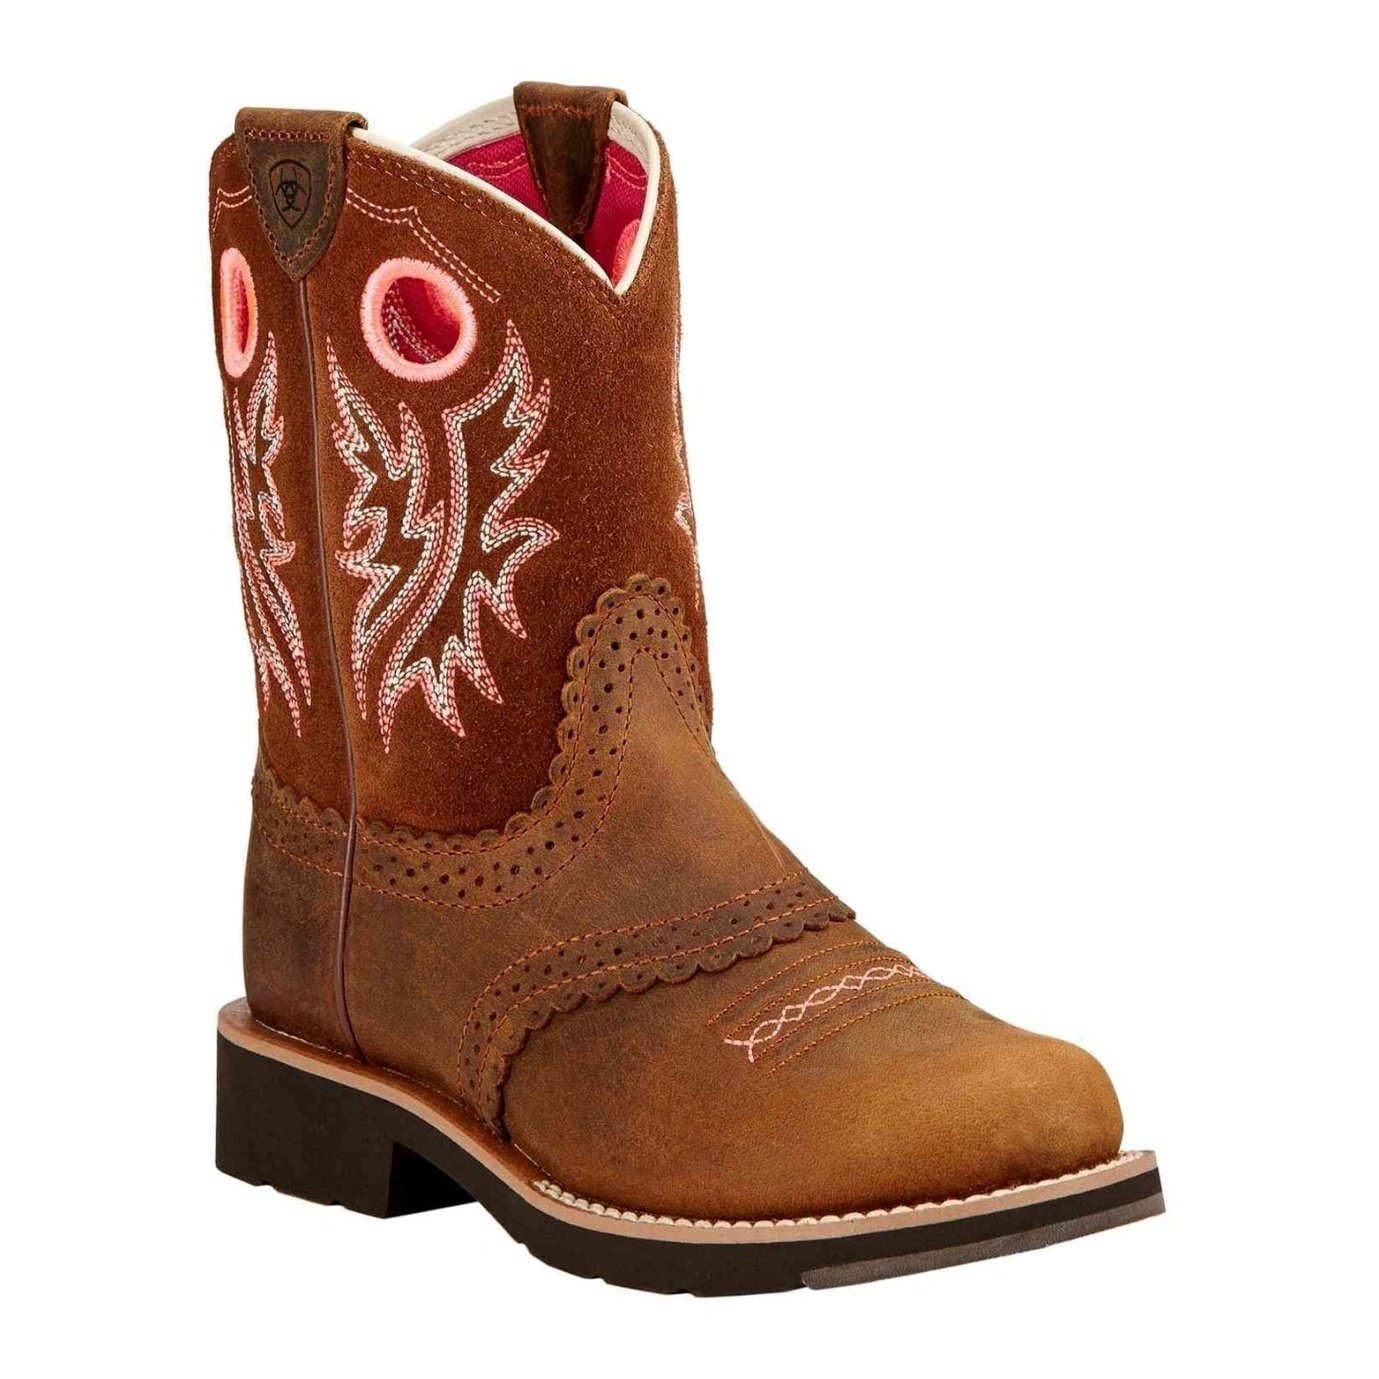 Ariat Girl's Cowgirl Boots 7" Fat Baby Boots 10017309 - Ariat